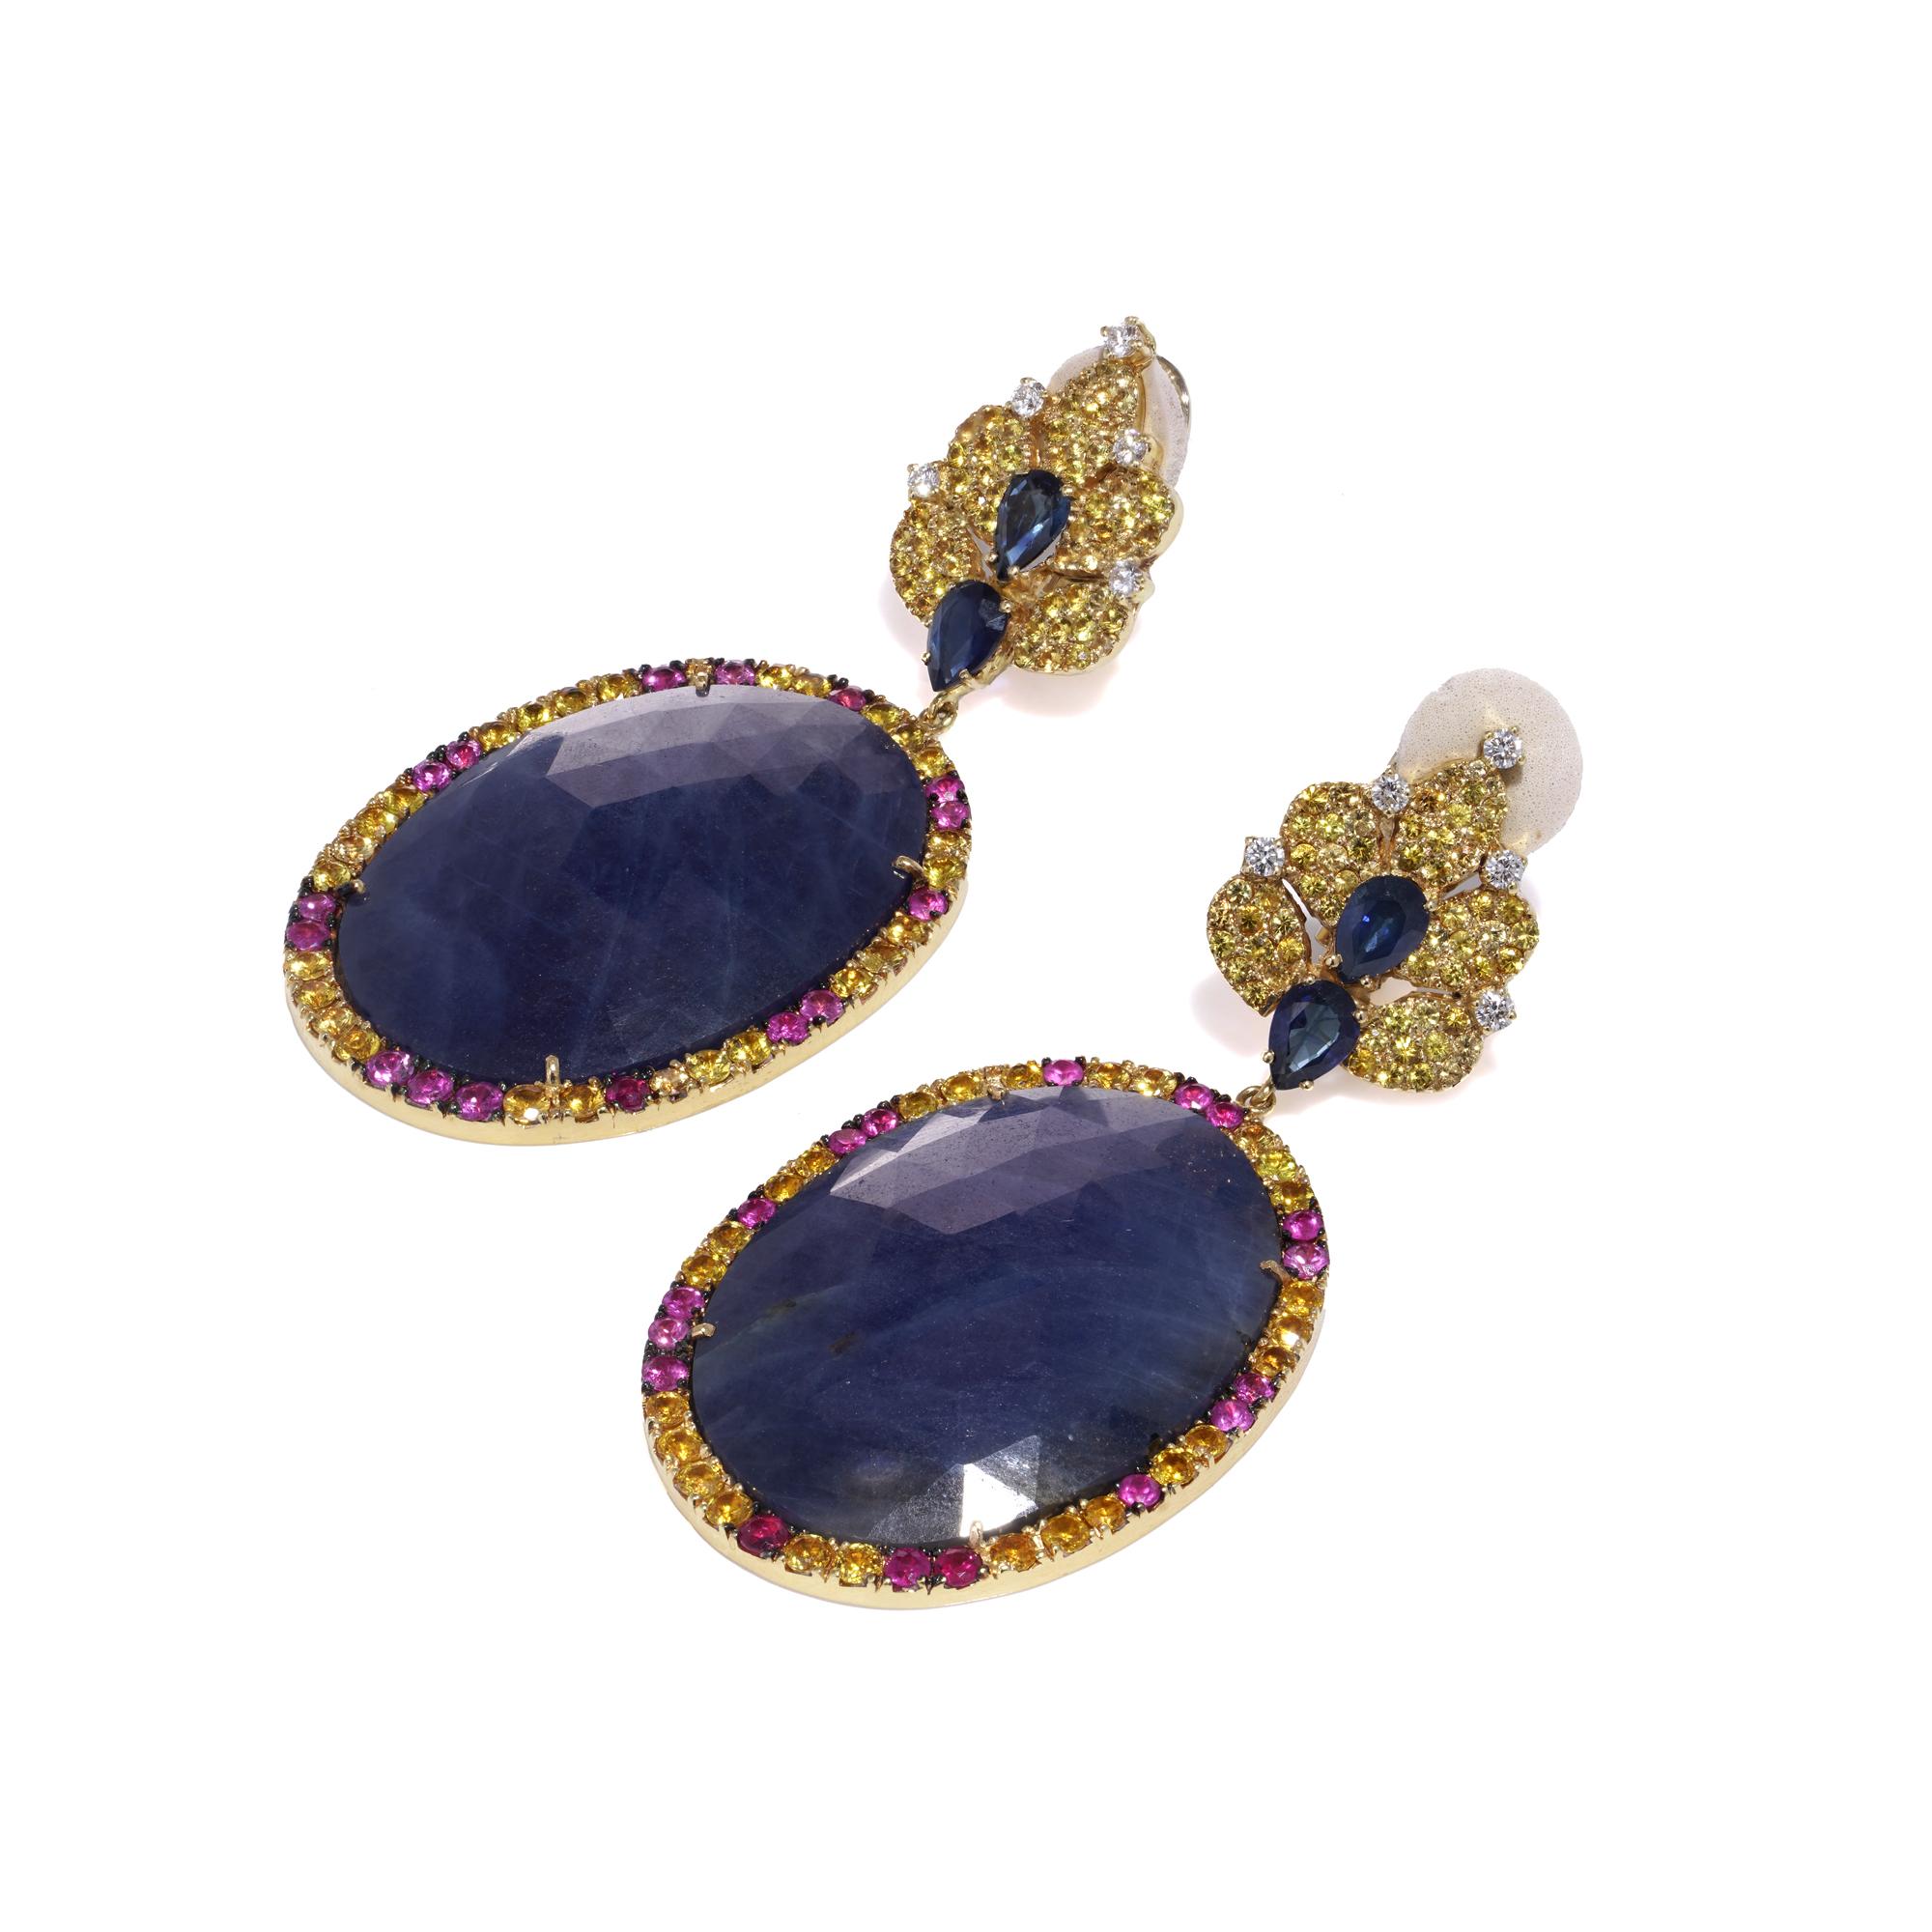 The natural Blue, Pink and Yellow Sapphire and diamond dangle earrings.

Dimensions:
Length: 7 cm 
Width: 3.2 cm 
Weight: 52 grams 

The earrings feature an impressive oval rose - cut sapphire plaques surrounded by yellow and pink sapphires.
The